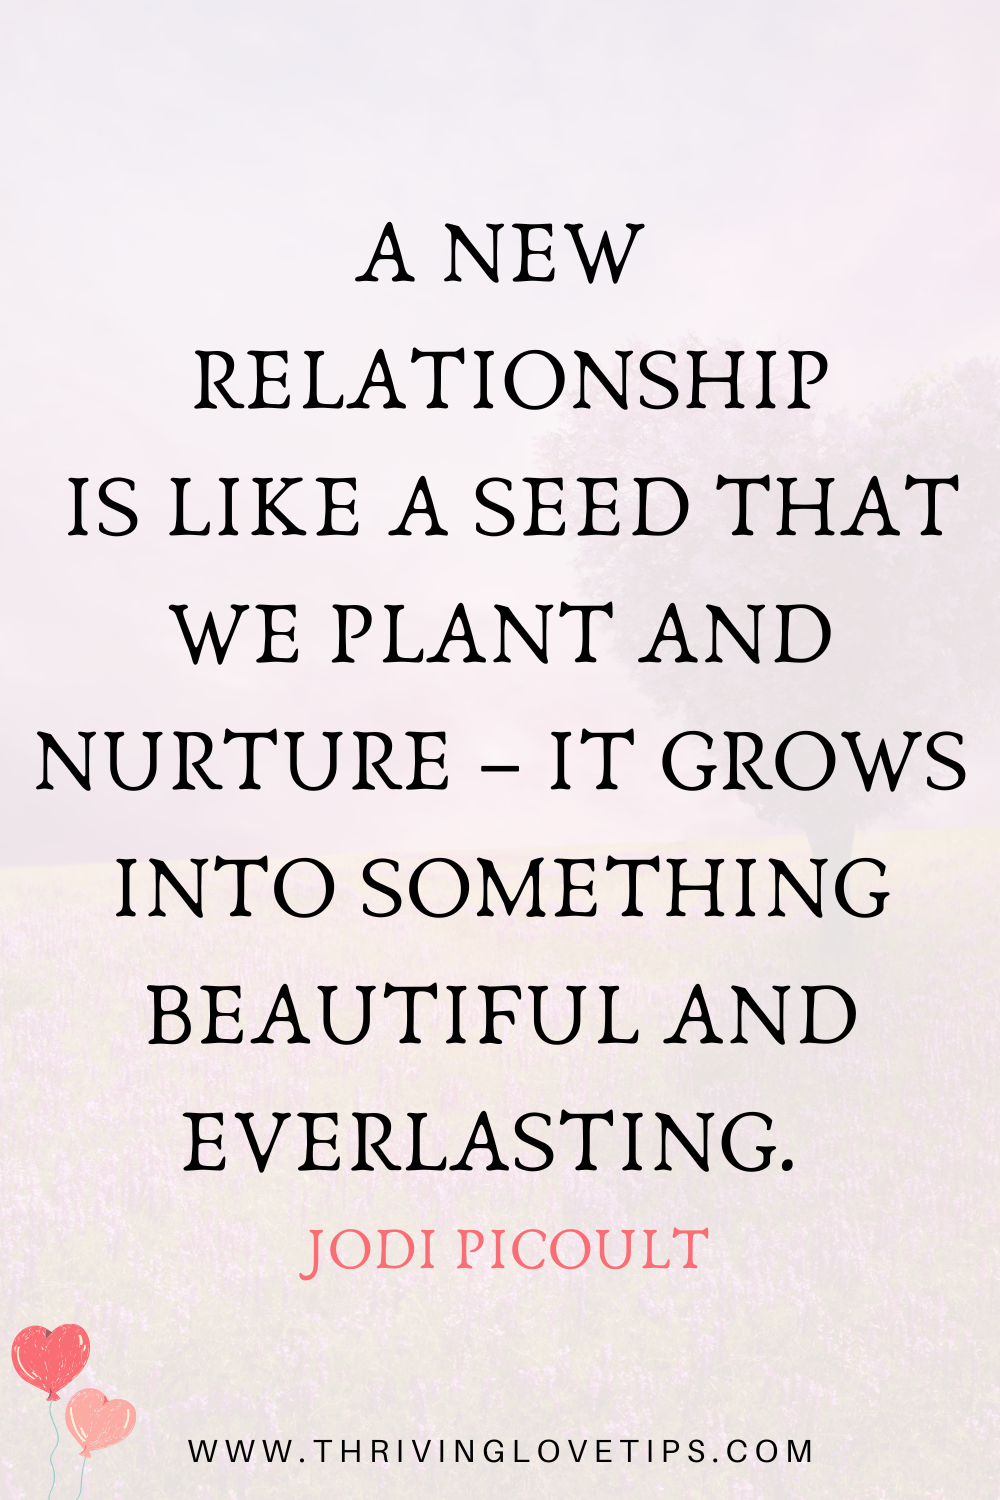  Best New Relationship Quotes